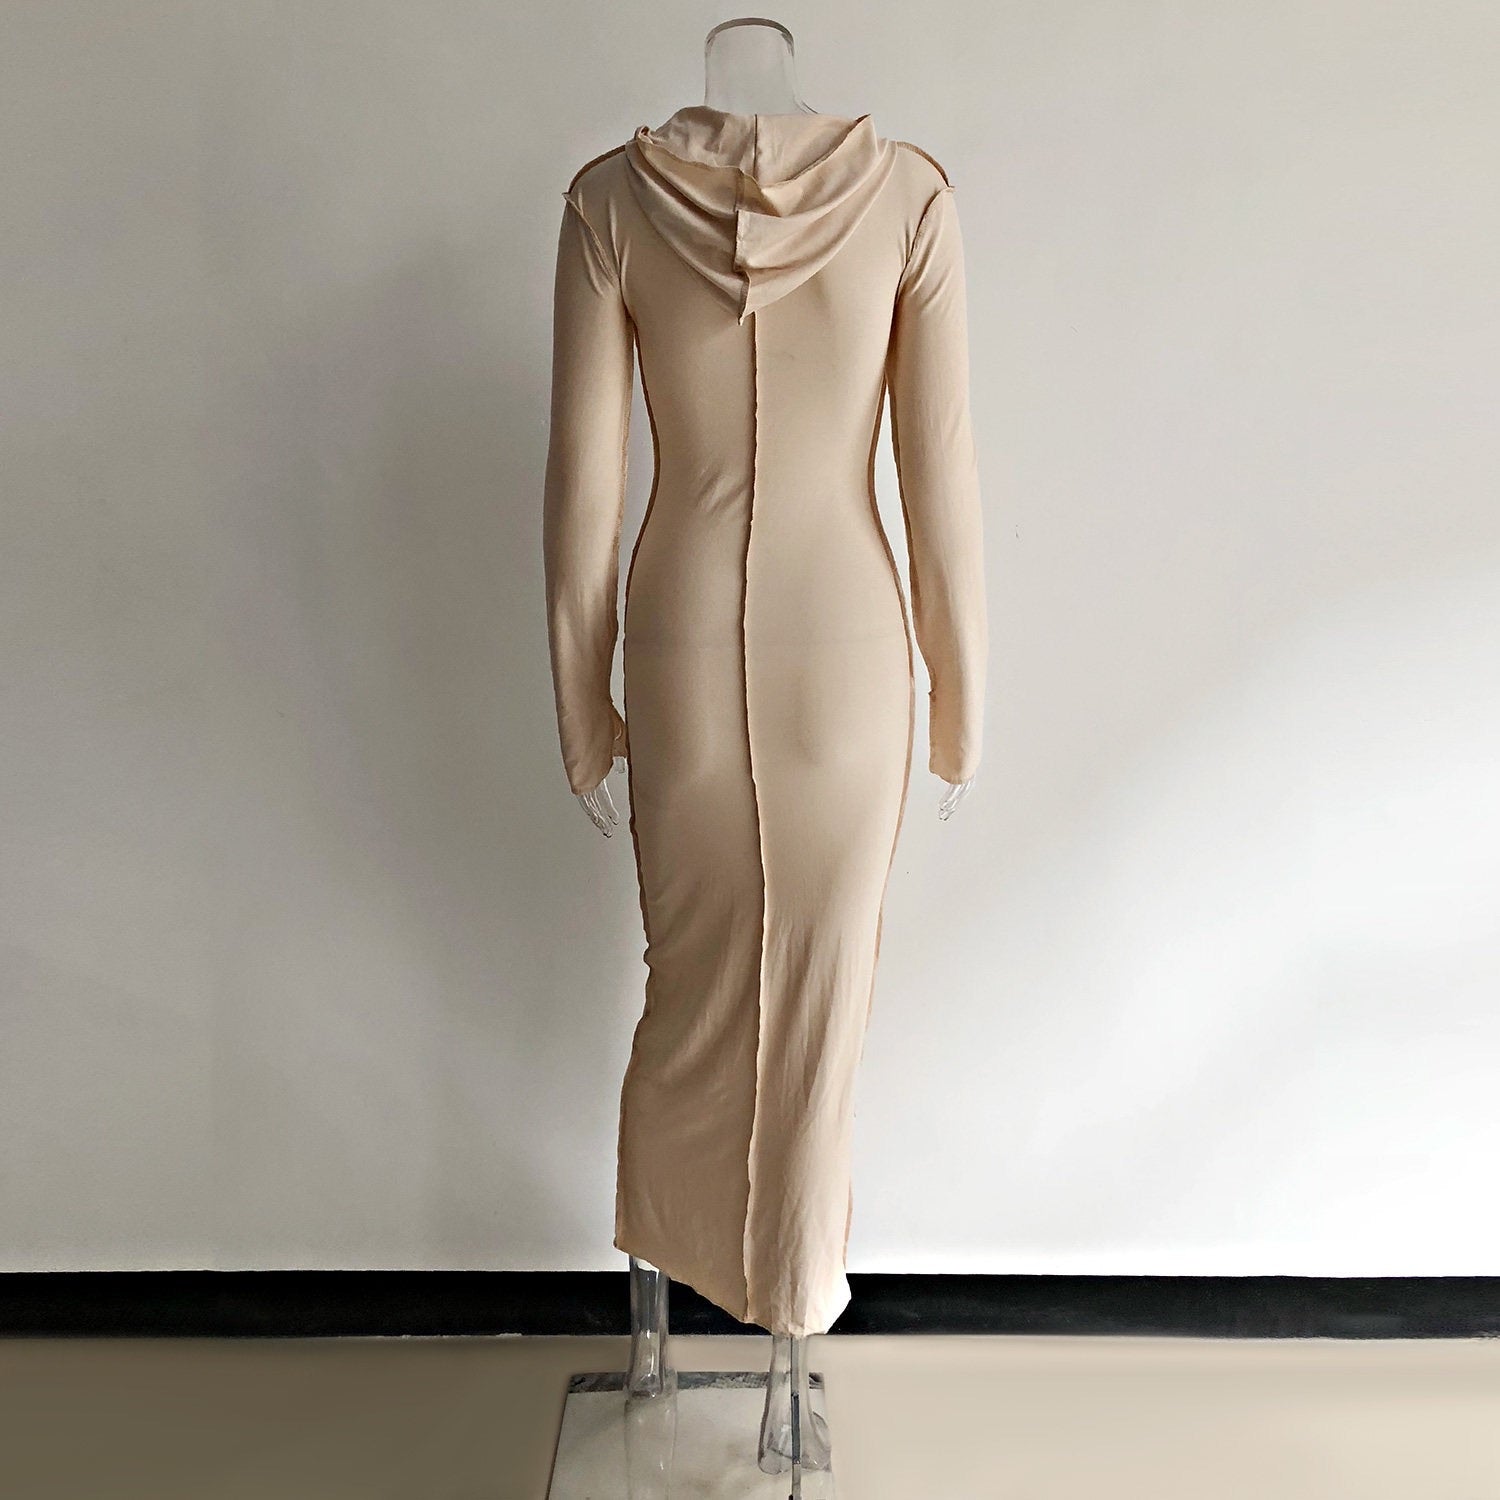 Stretchy hooded lined dress